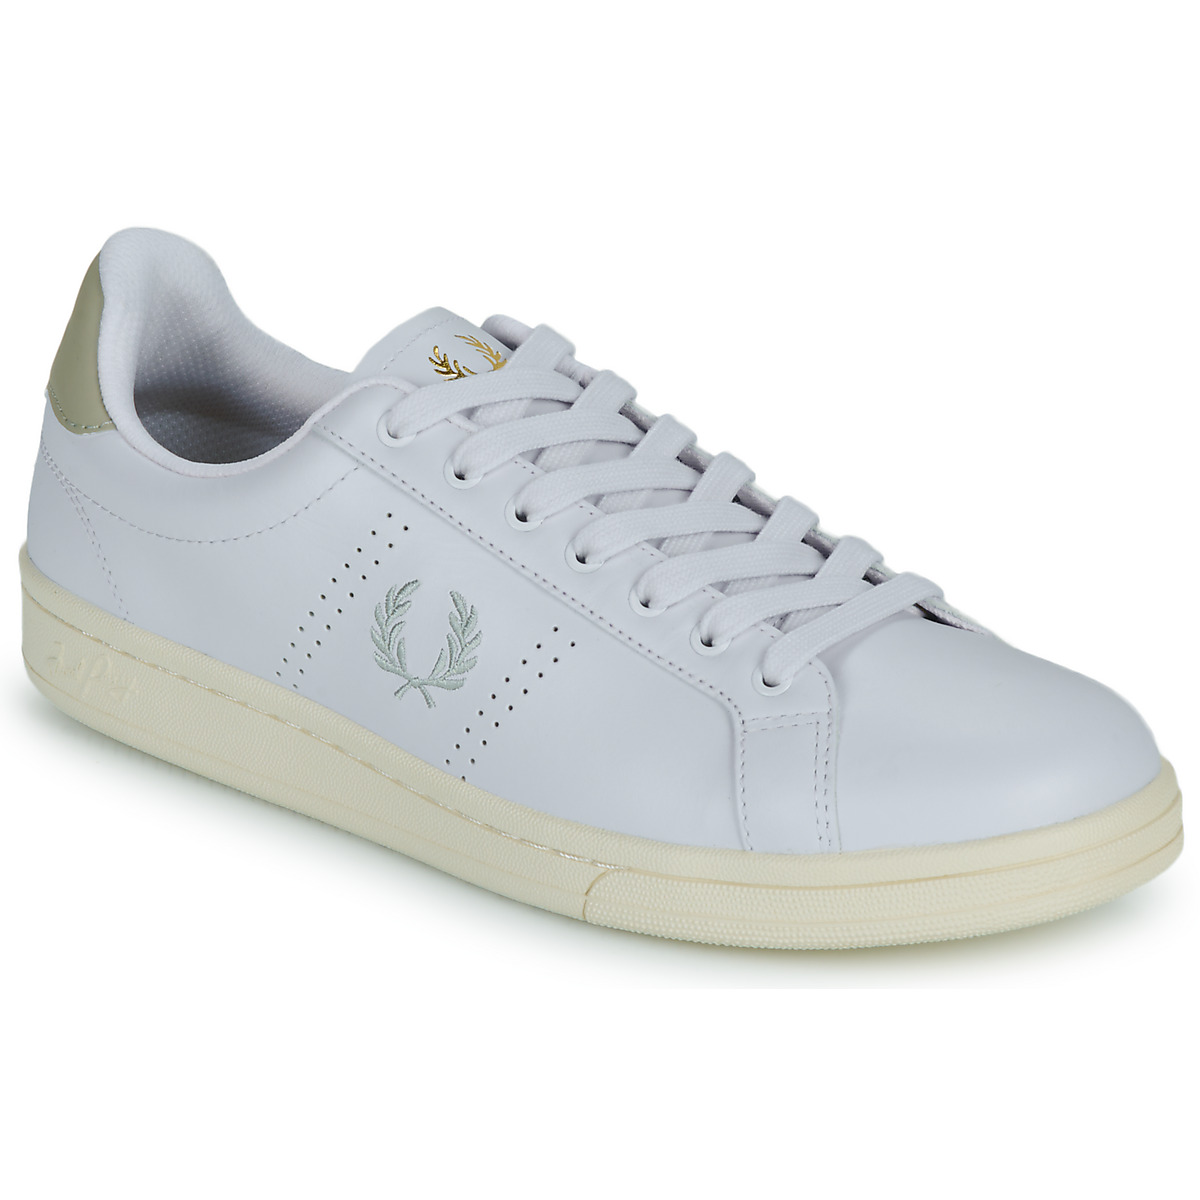 Fred Perry Blanc B721 LEATHER kUftQNGK